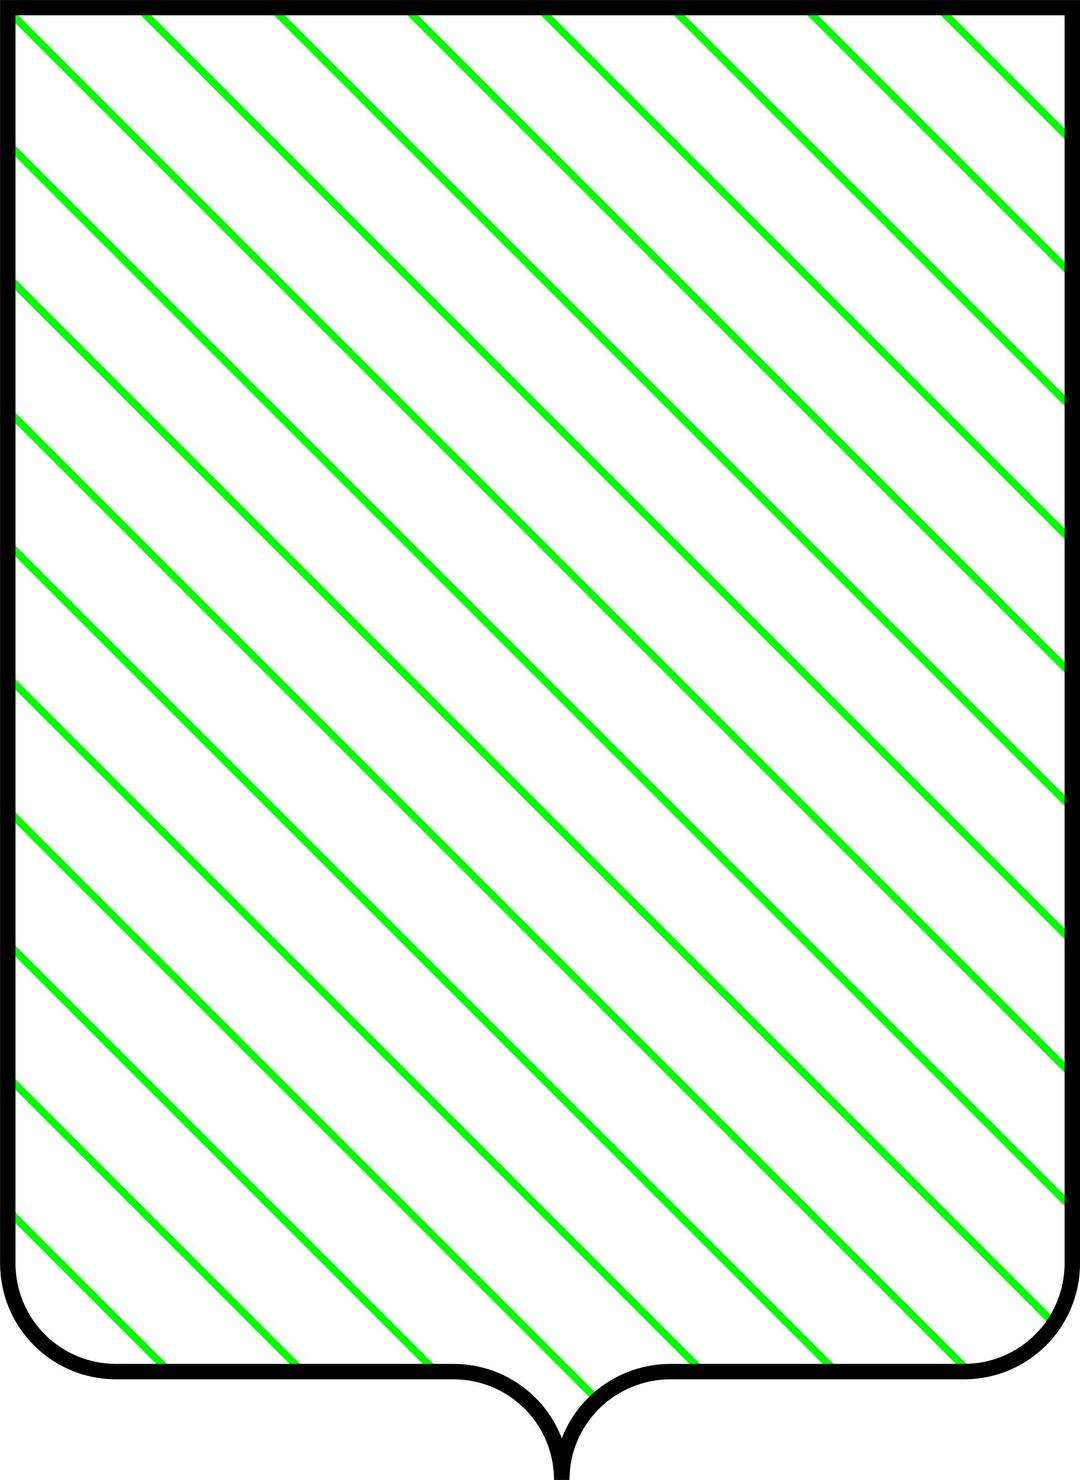 Shield Pattern Transversal Left to Right png transparent